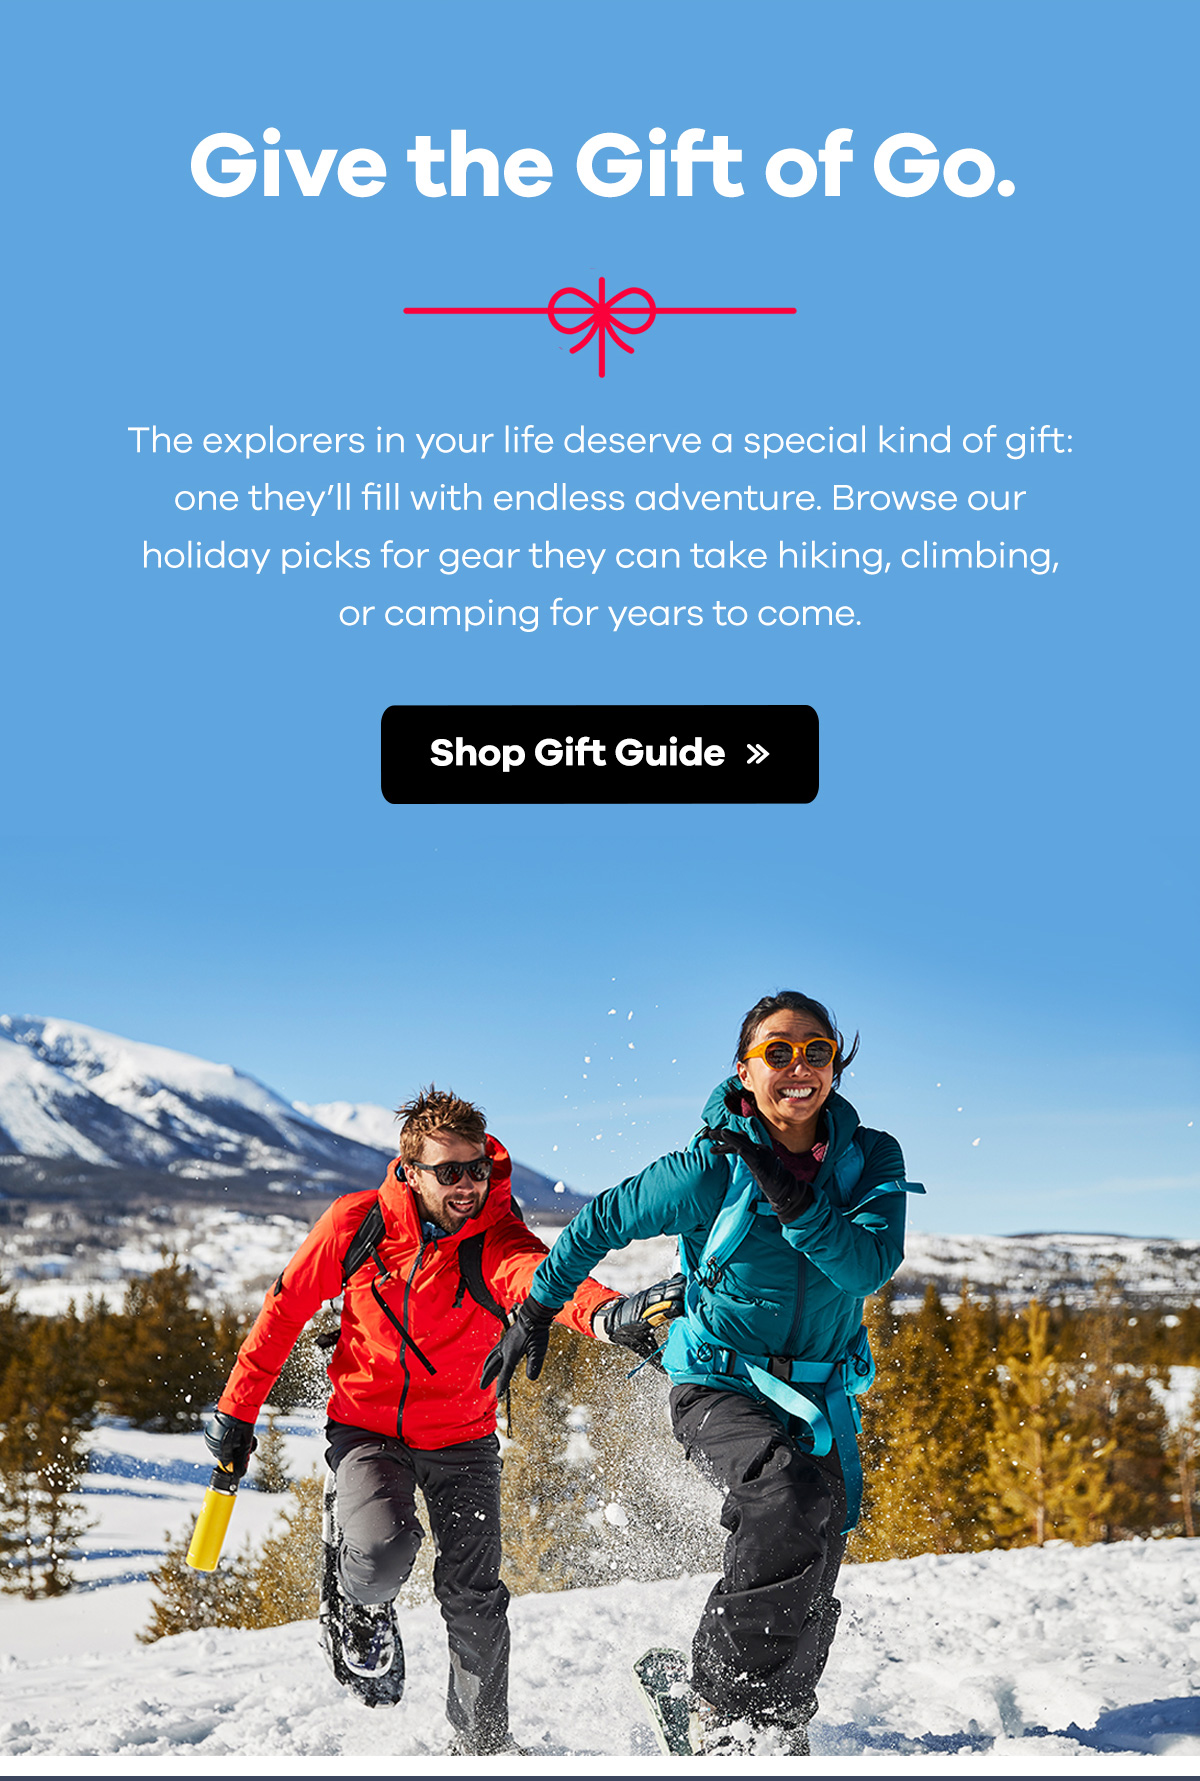 Give the Gift of Go | The explorers in your life deserve a special kind of gift: one they'll fill with endless adventure. Browse our holiday picks for gear they can take hiking, climbing, or camping for years to come. | Shop Gift Guide >>